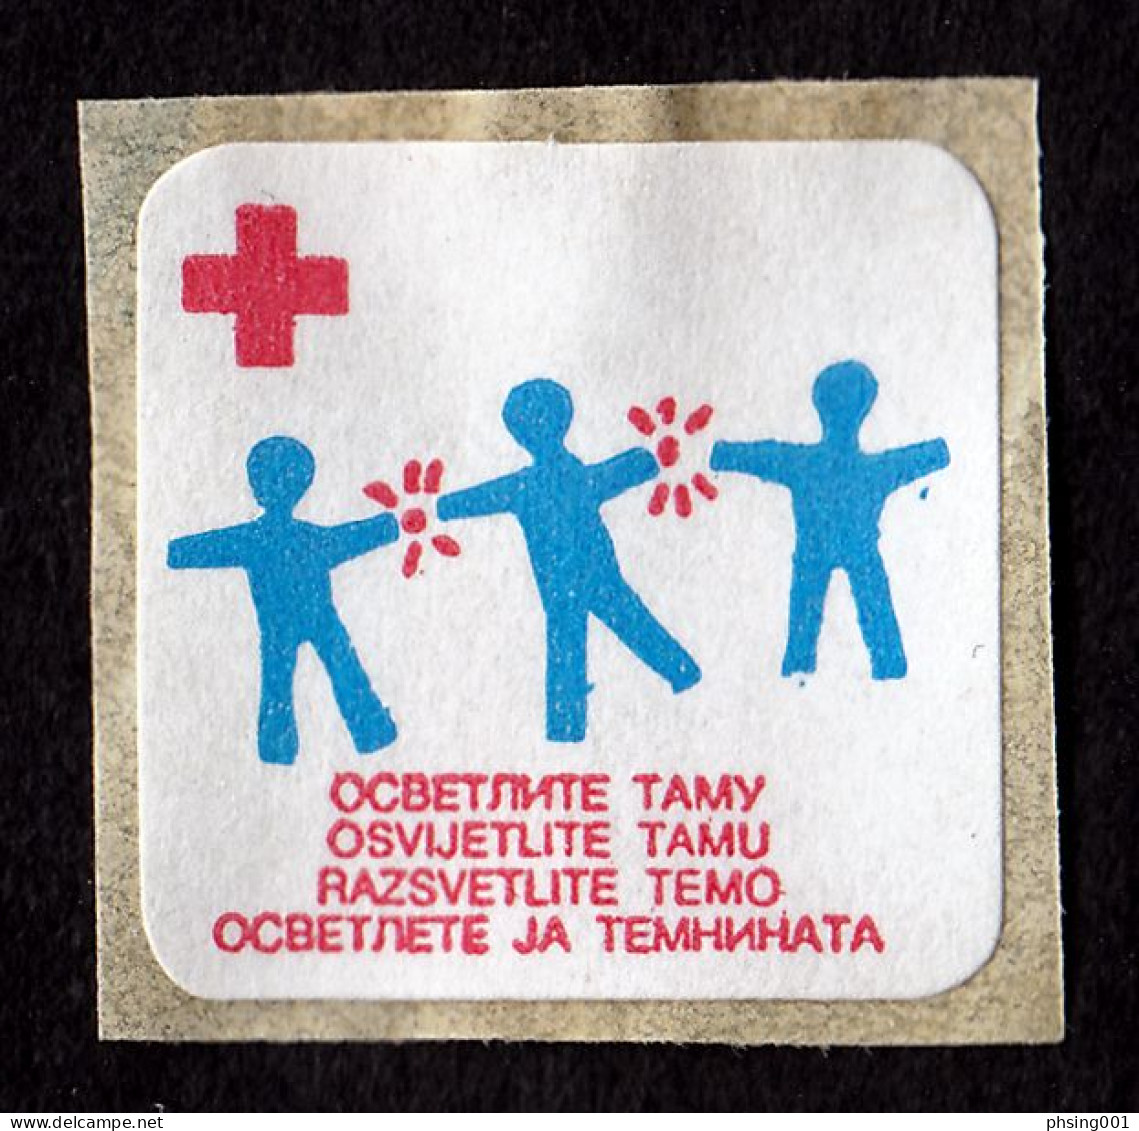 Yugoslavia 1991 Red Cross Croix Rouge Rotes Kreuz Tax Charity Surcharge Self Adhesive Stamp MNH - Timbres-taxe